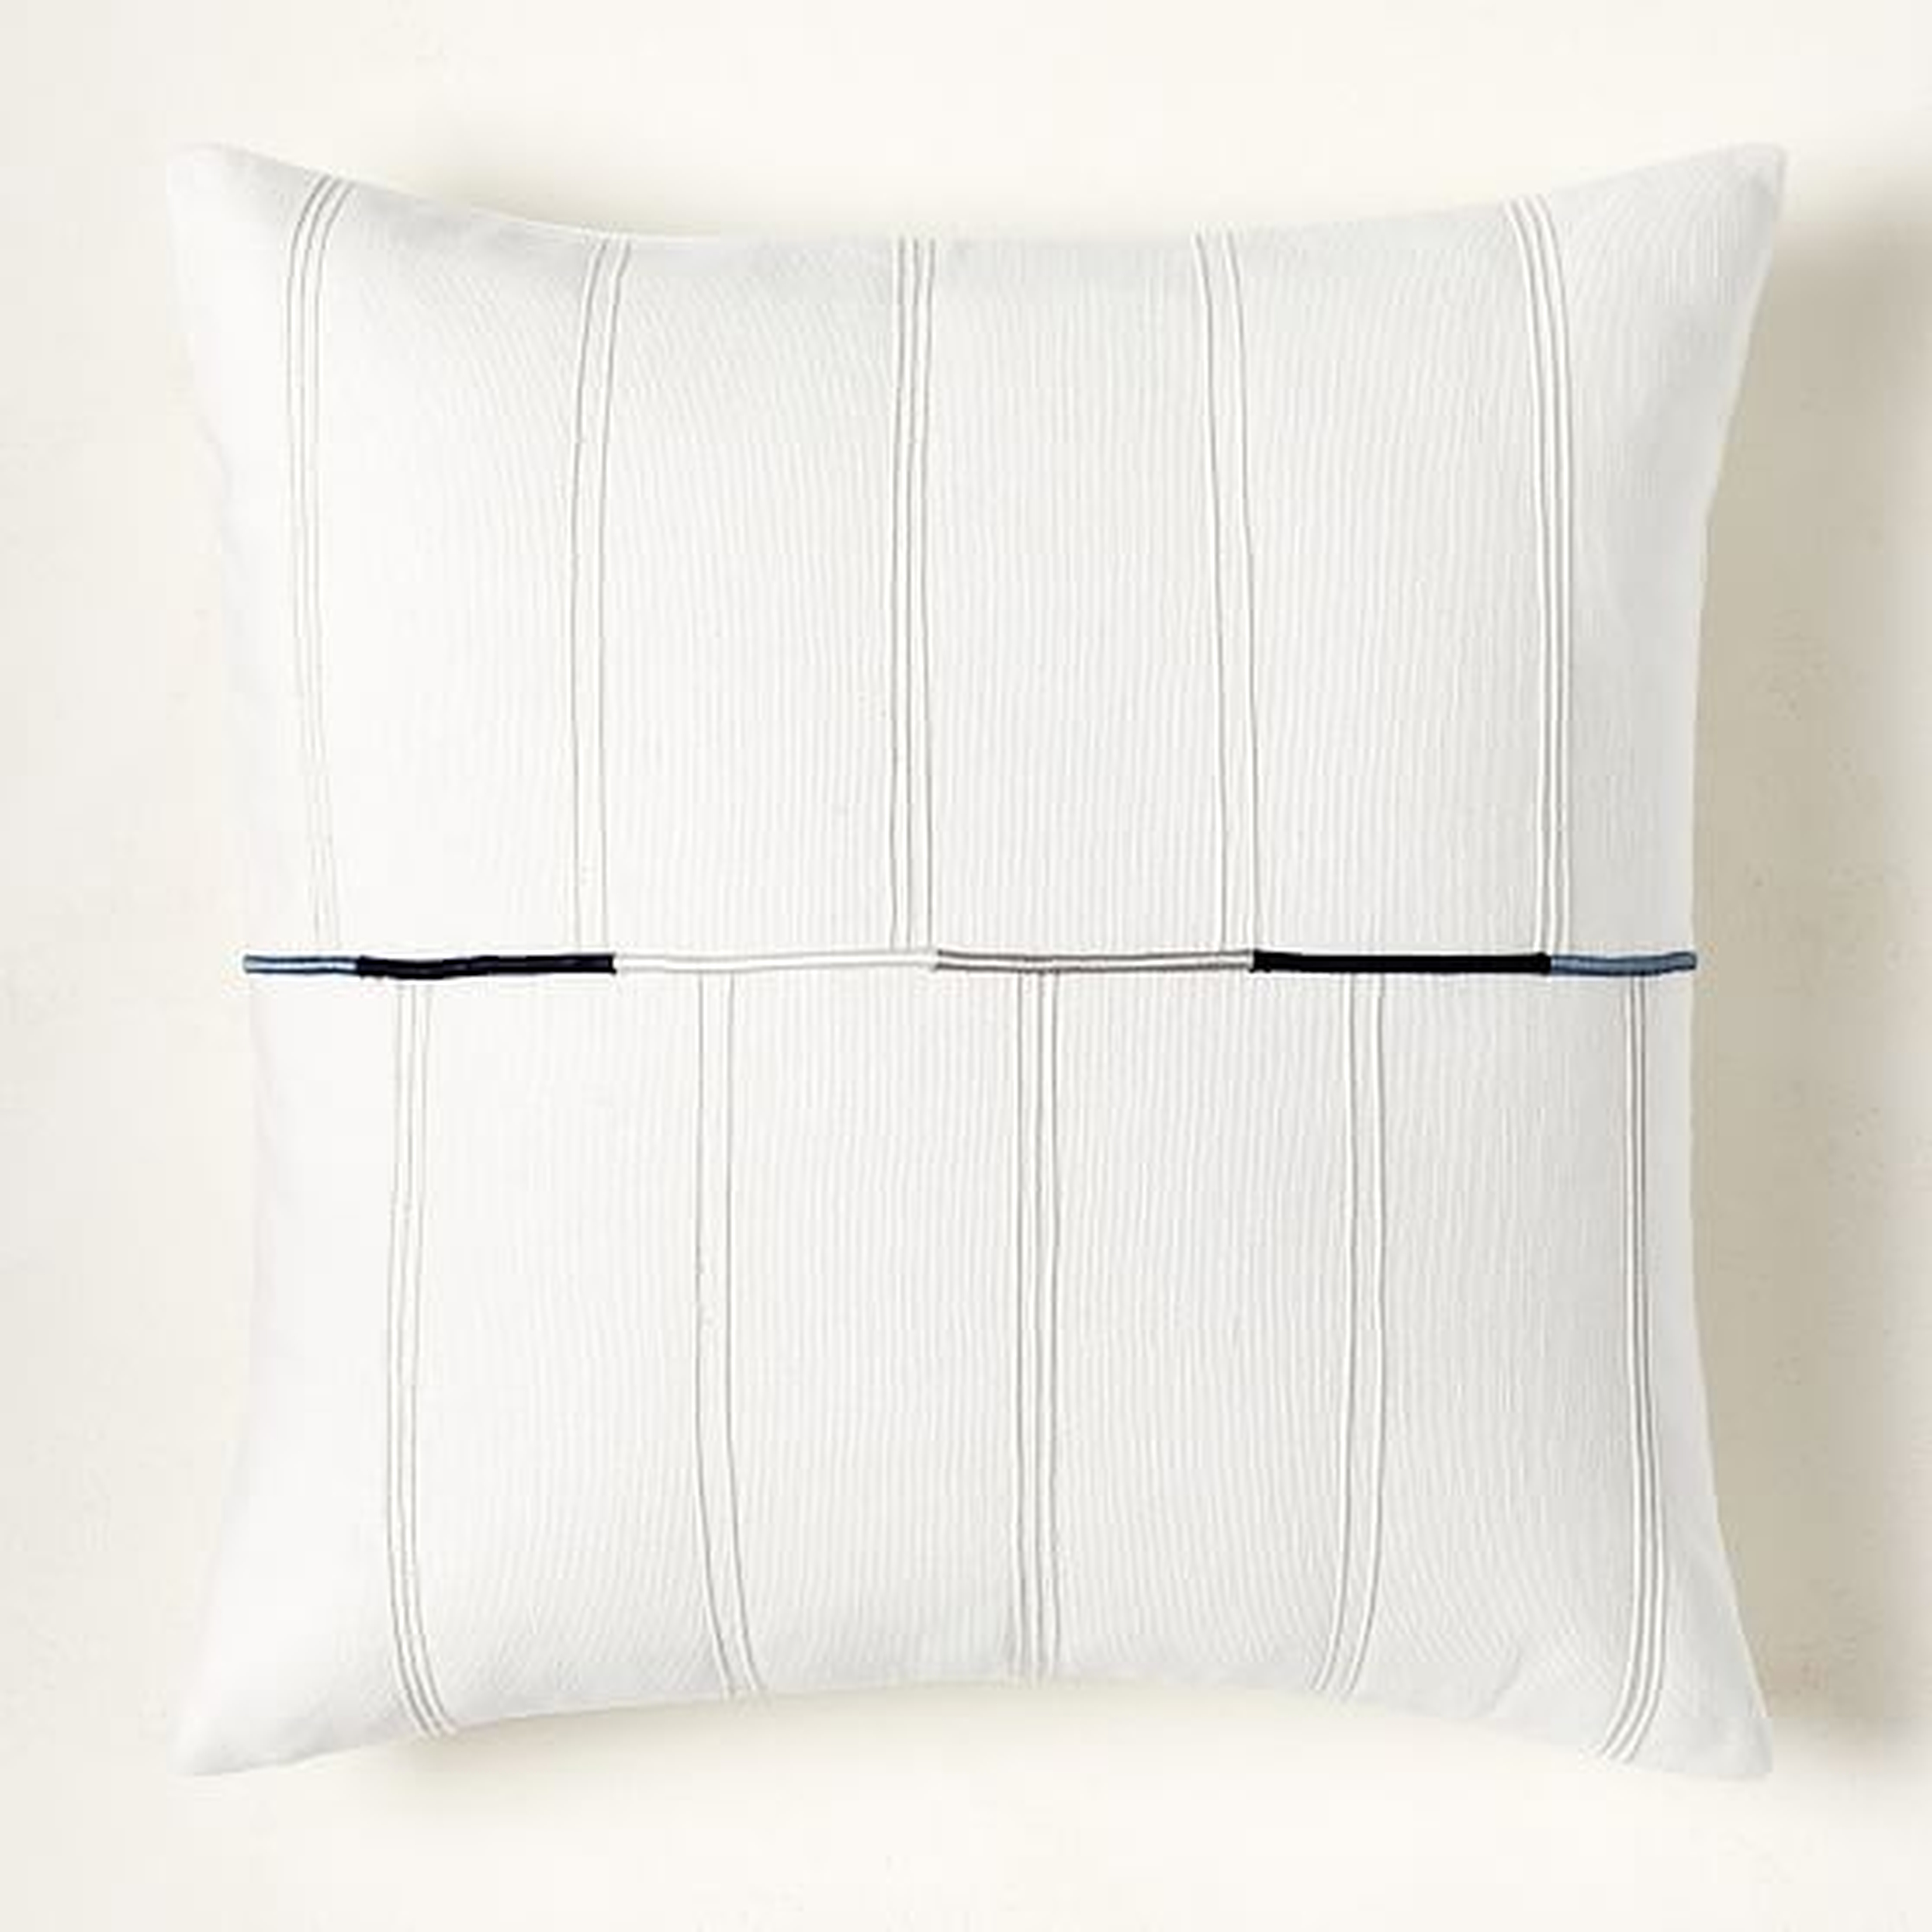 Dori Embroidered Cotton Canvas Pillow Cover, 20"x20", White - West Elm